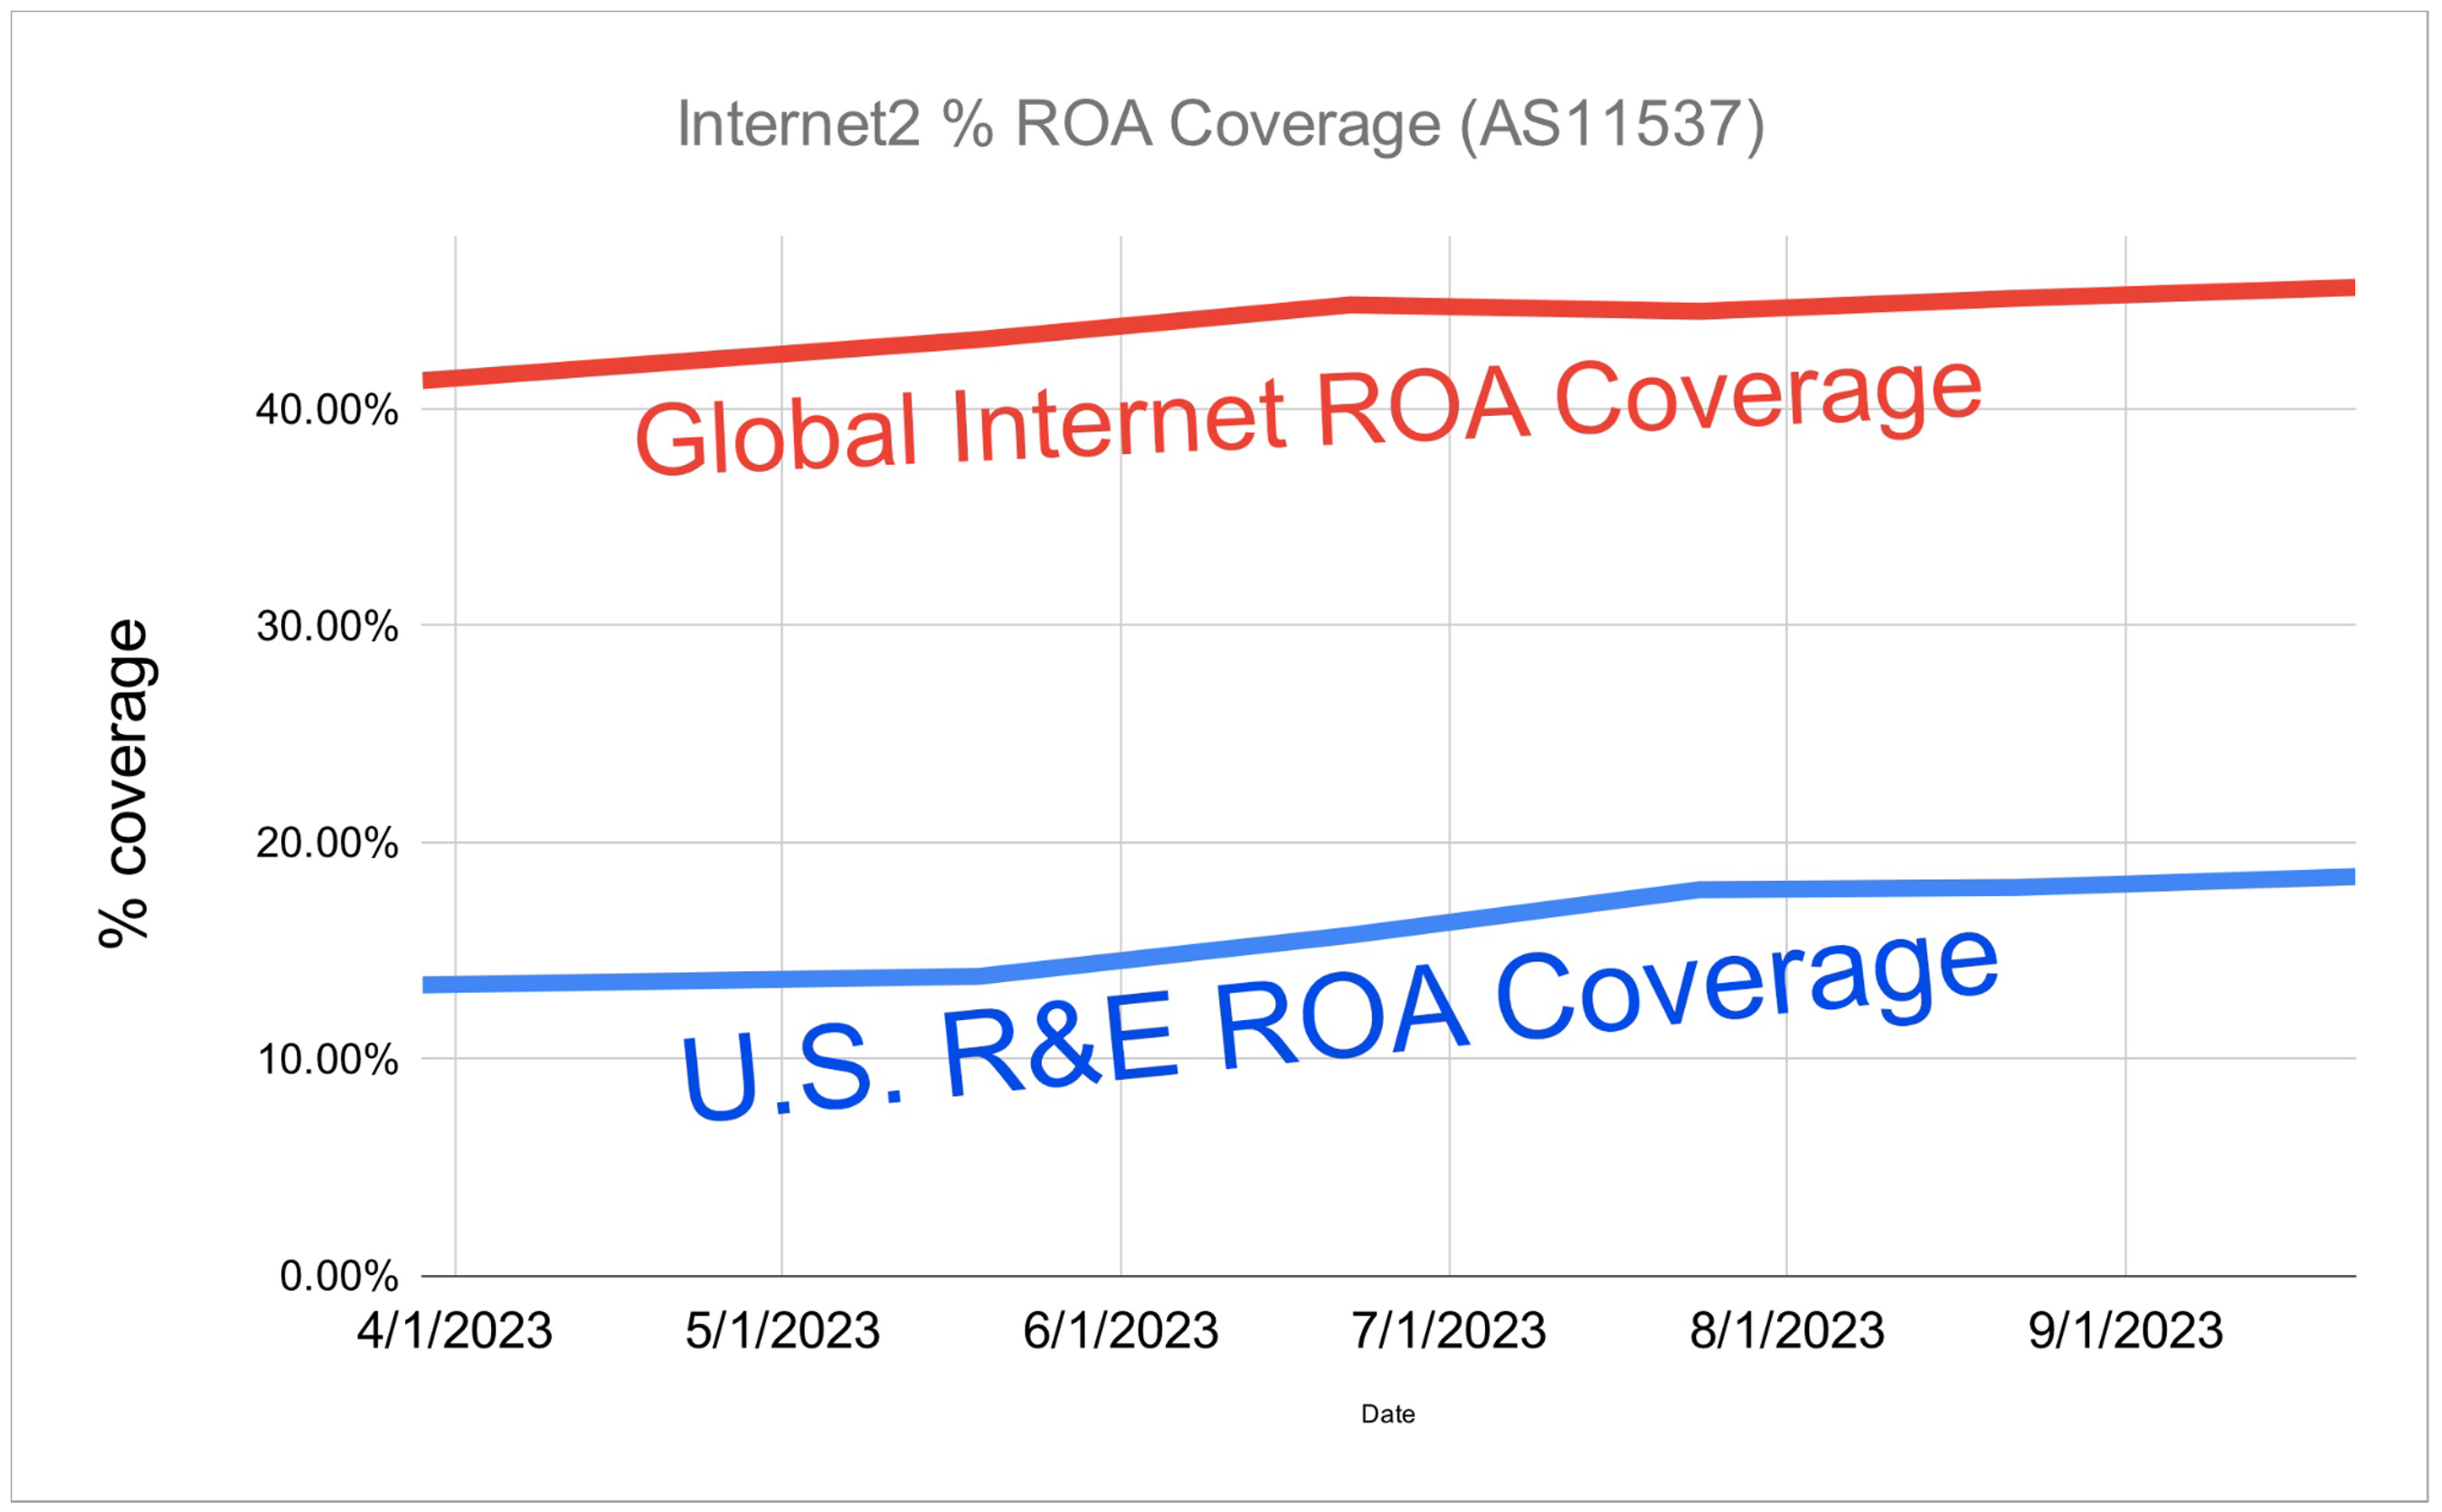 Graph decpicting percent of ROA coverage in the entire Internet vs. in the U.S. Research and Education community